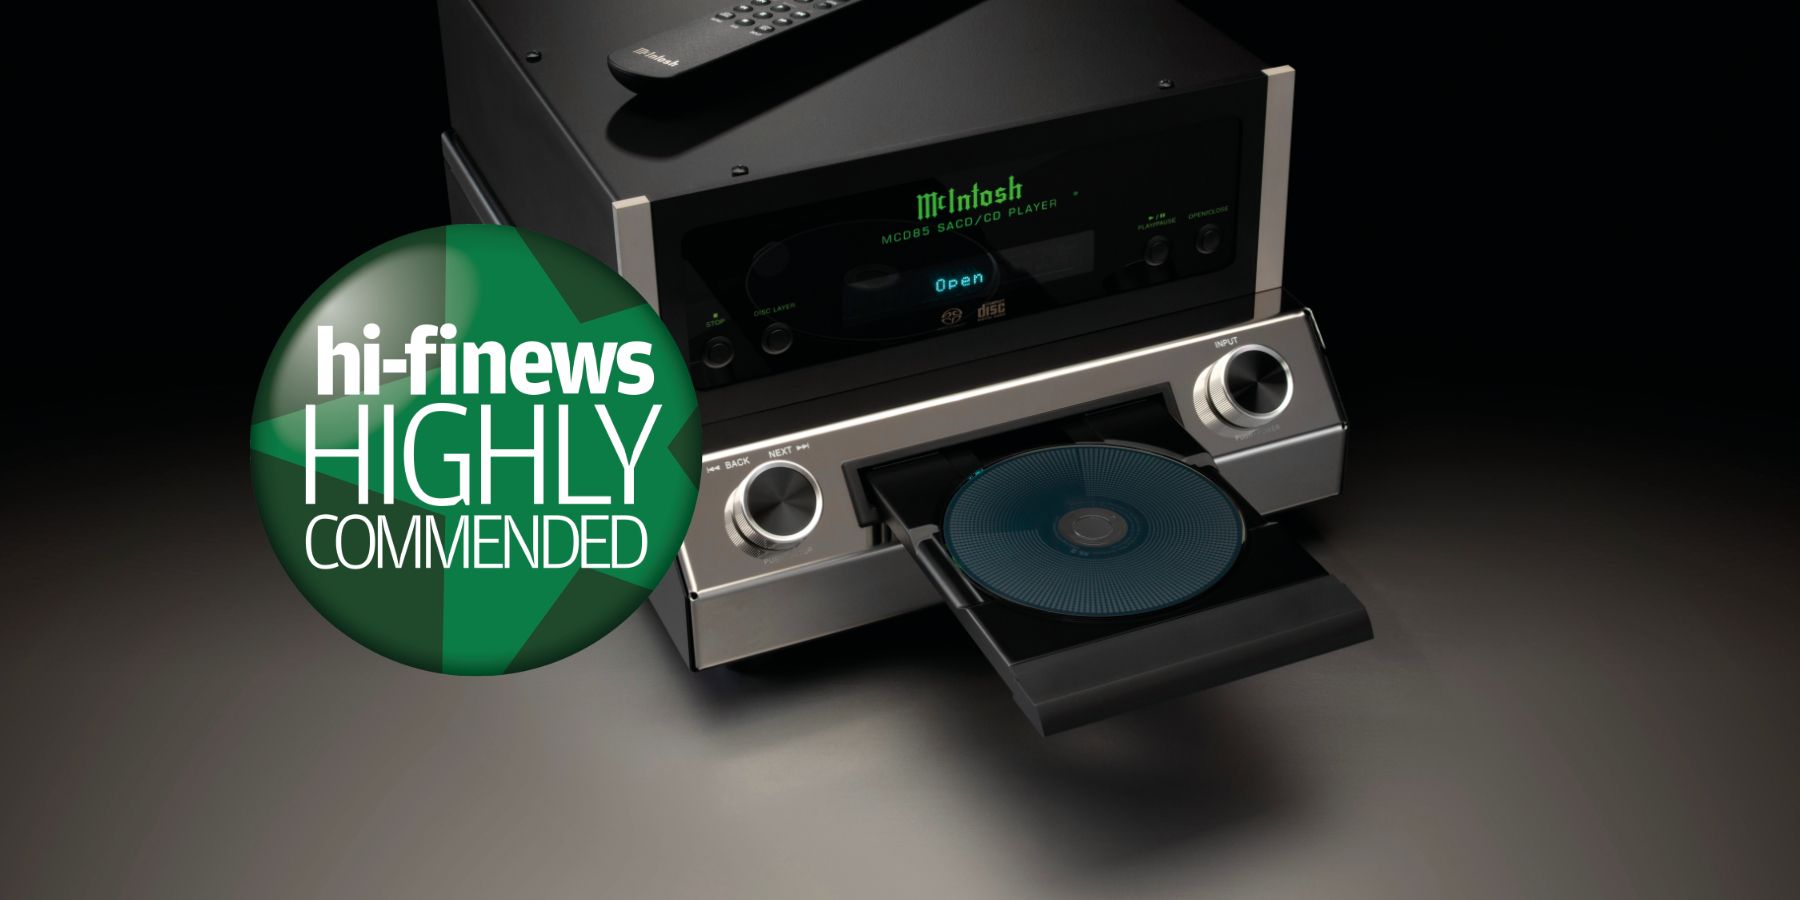 Hi-Fi News reviews the new McIntosh MCD85 CD/SACD player and says it's "a persuasive way of doing what it sets out to achieve"